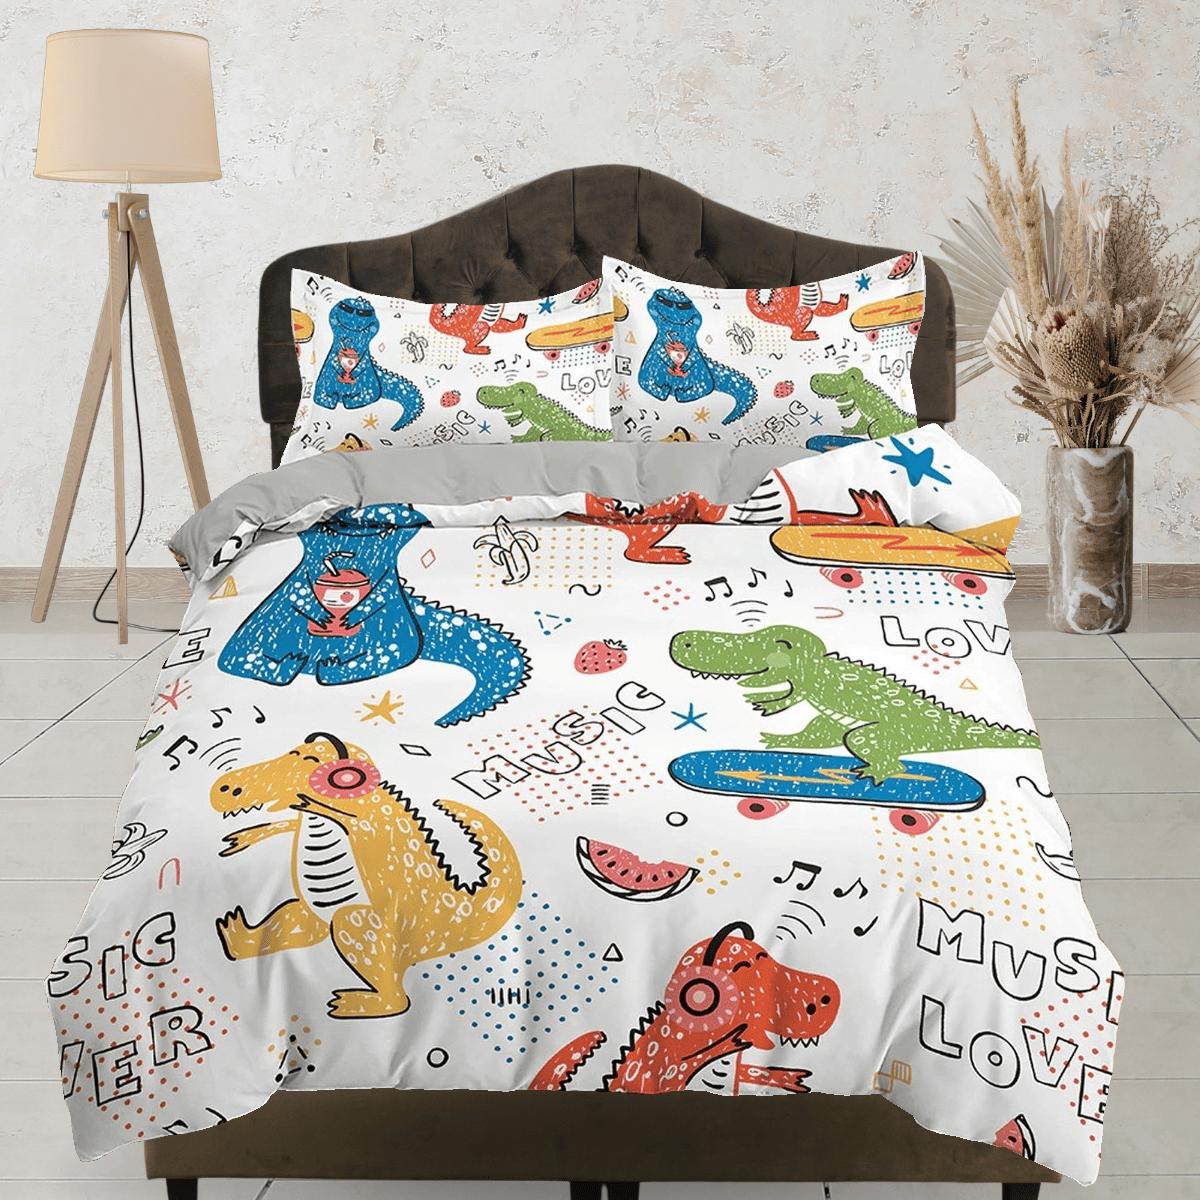 daintyduvet Colorful Dinosaurs Music Lovers, Cool Toddler Bedding, Unique Duvet Cover for Kids, Crib Bedding, Baby Zipper Bedding, King Queen Full Twin